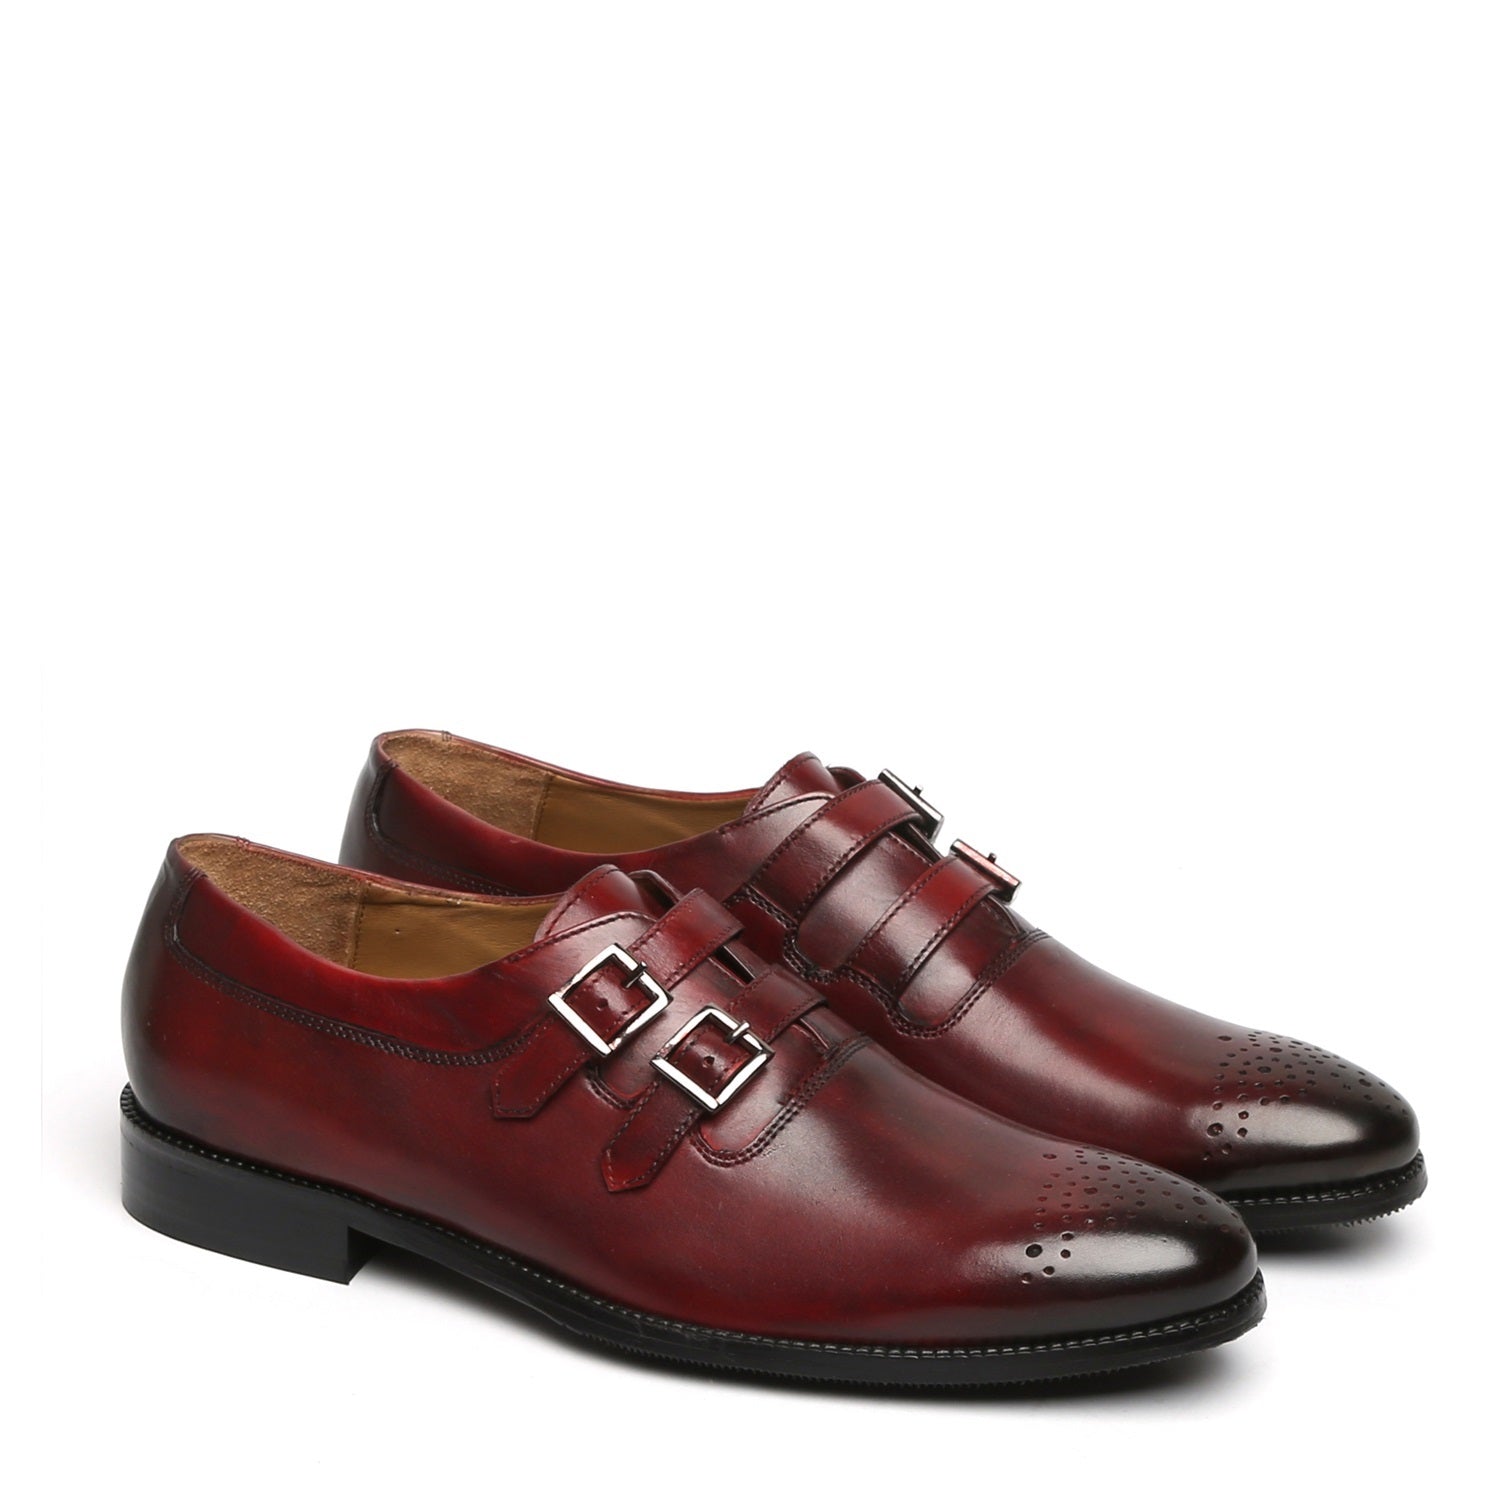 WINE PARALLEL DOUBLE MONK STRAPS LEATHER FORMAL SHOES BY BRUNE & BARESKIN